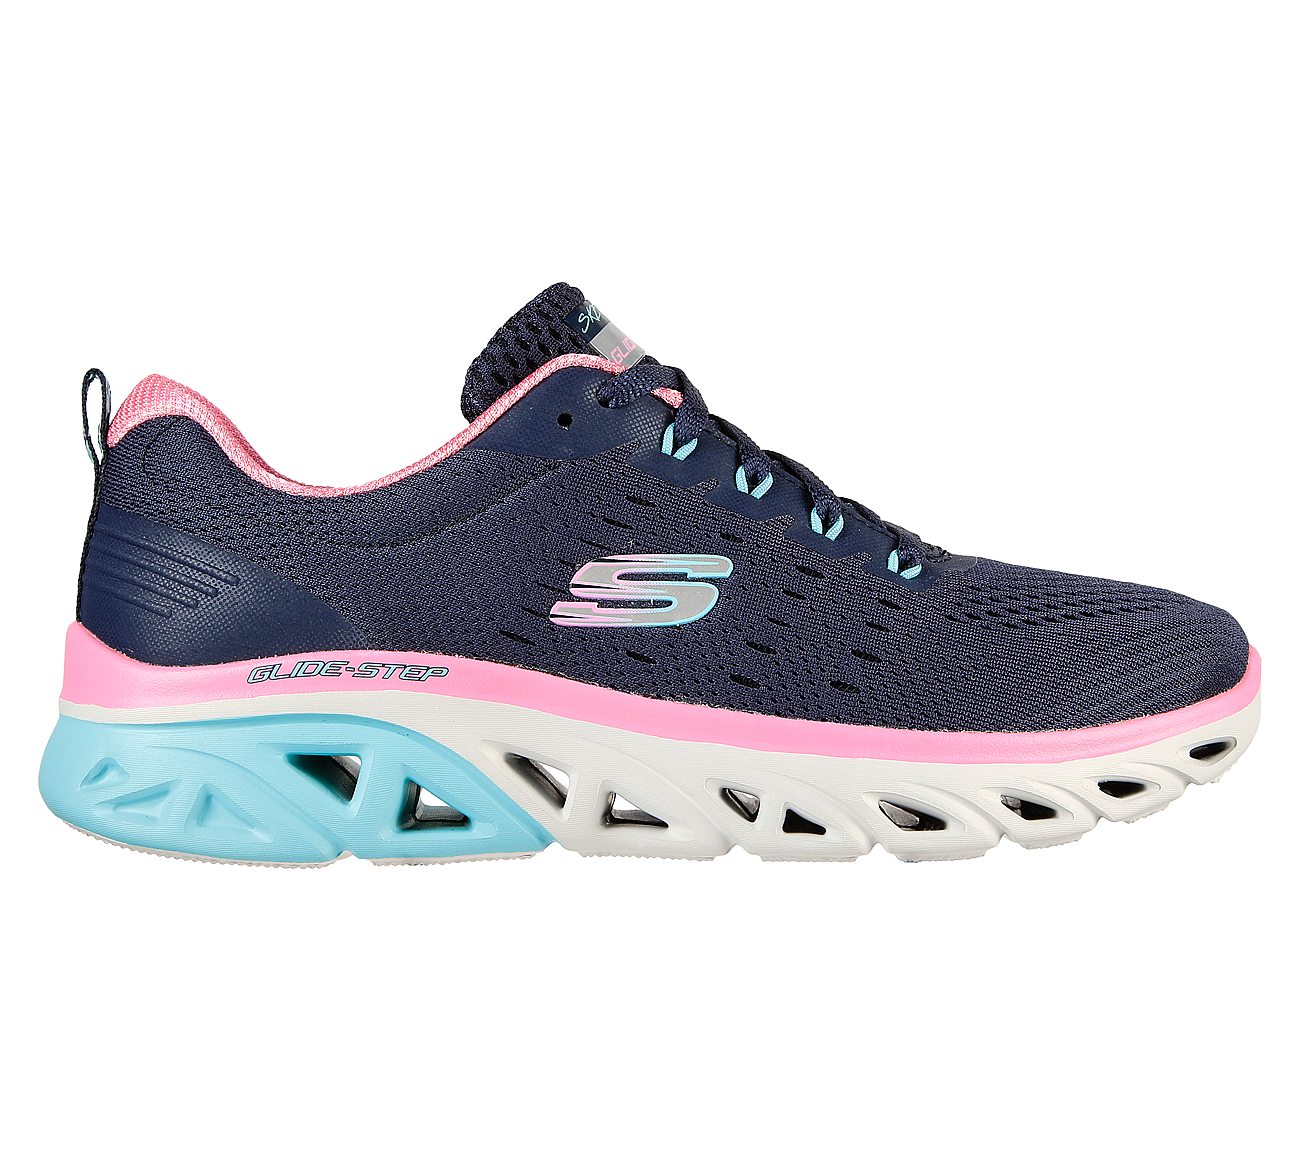 GLIDE-STEP SPORT-NEW APPEAL, NAVY/MULTI Footwear Right View